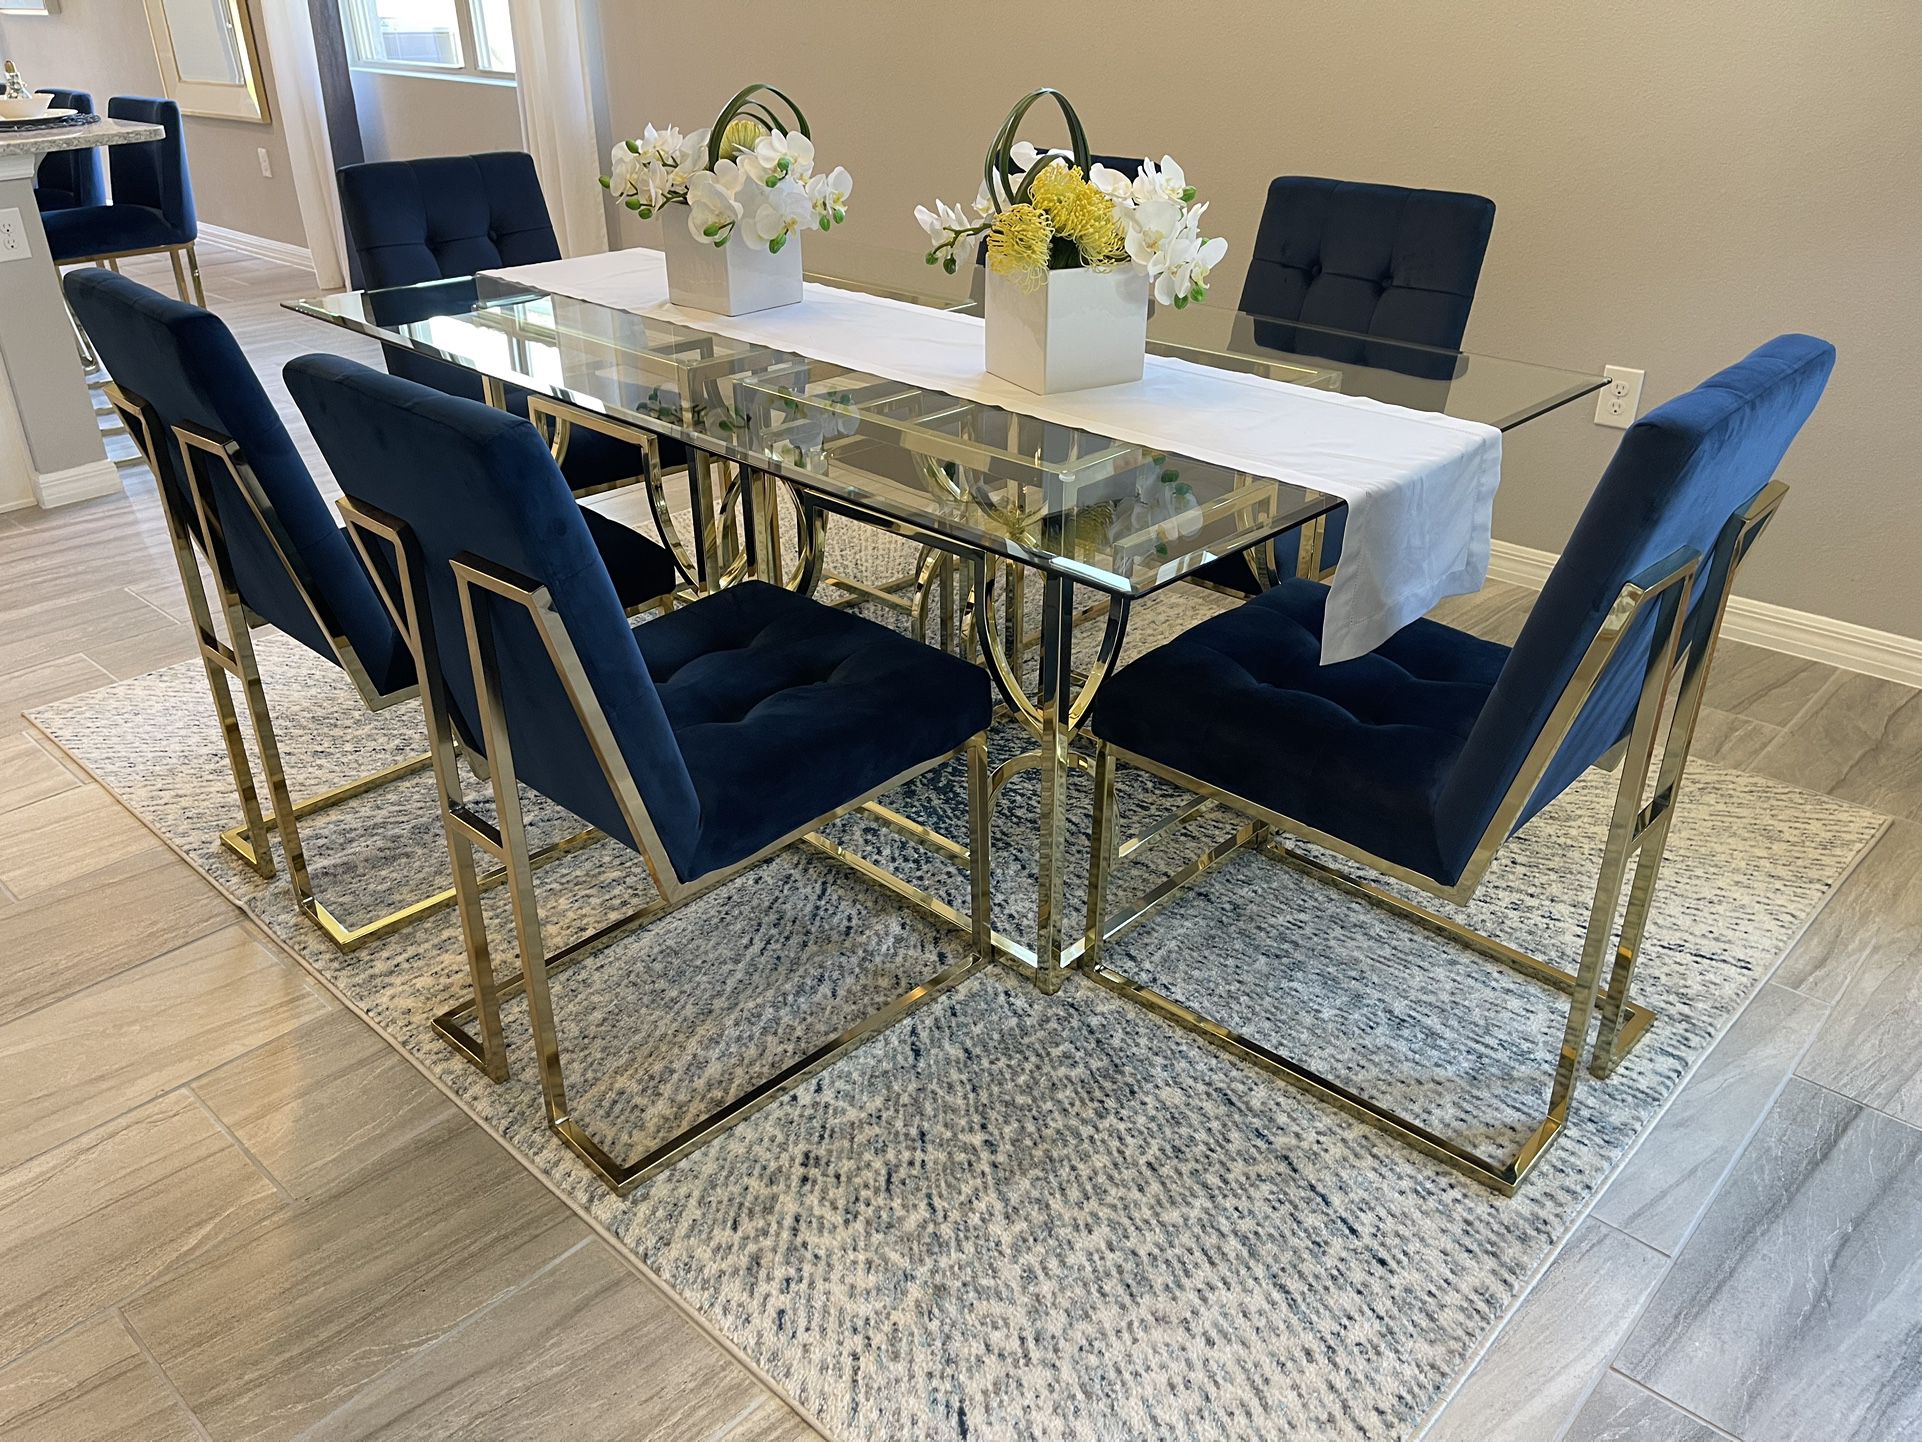 Glass Top Table & 6 Chairs (Blue & Gold) Used For Staging Purposes Only 